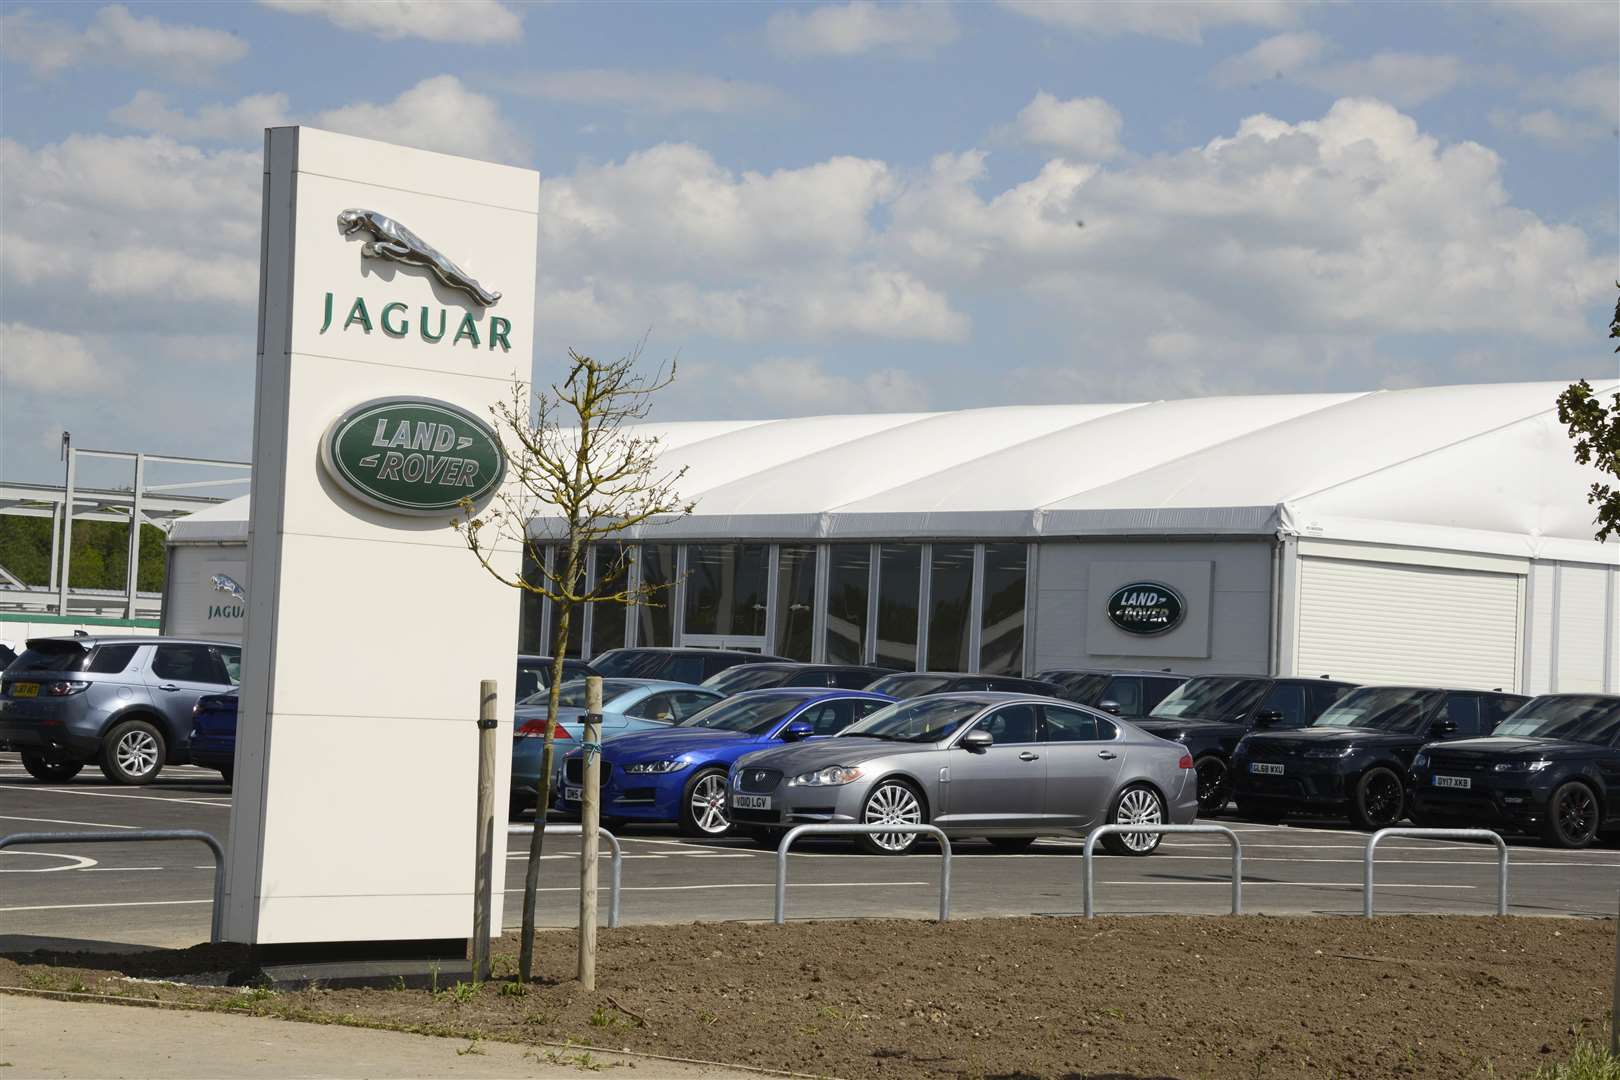 Barretts Land Rover's new facility in Waterbrook, where three cars were damaged. Picture: Paul Amos